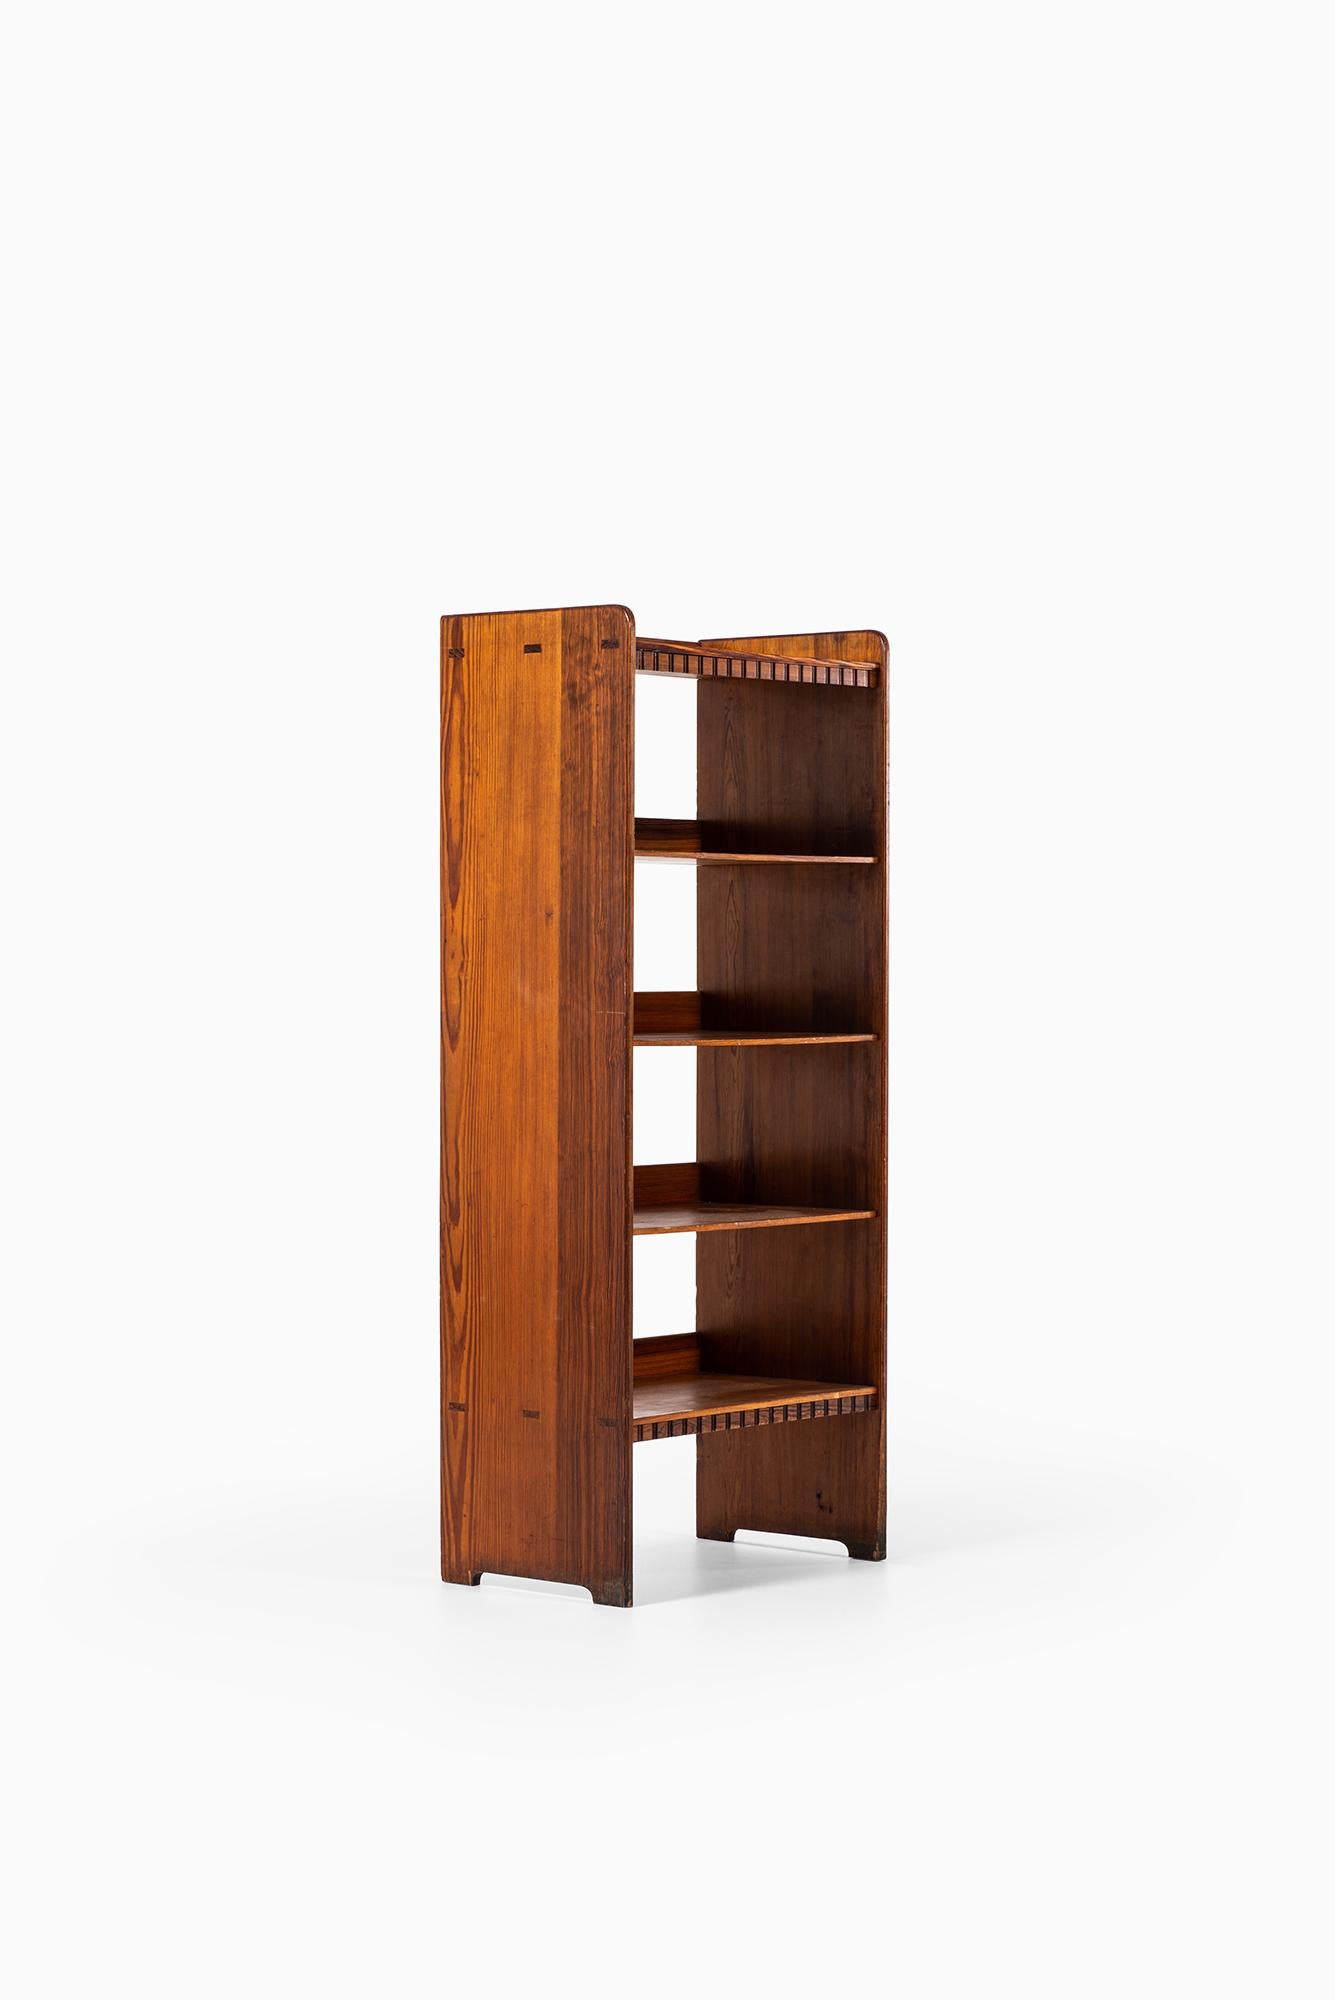 Mid-20th Century Martin Nyrop Bookcases in Oregon Pine Produced by Rud Rasmussen in Denmark